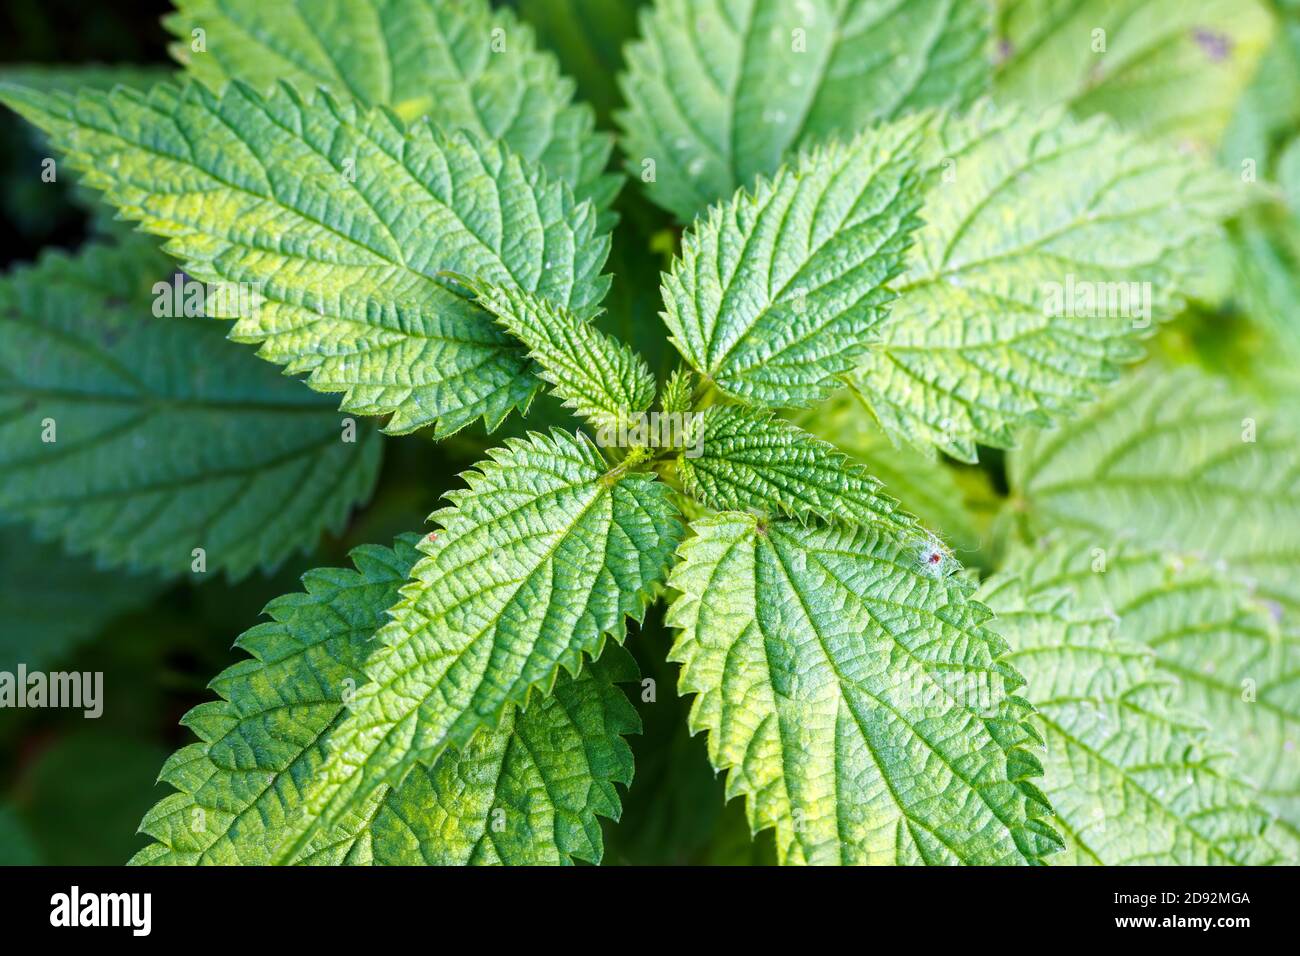 Top view of Urtica dioica, green leaves stinging nettle. Stock Photo